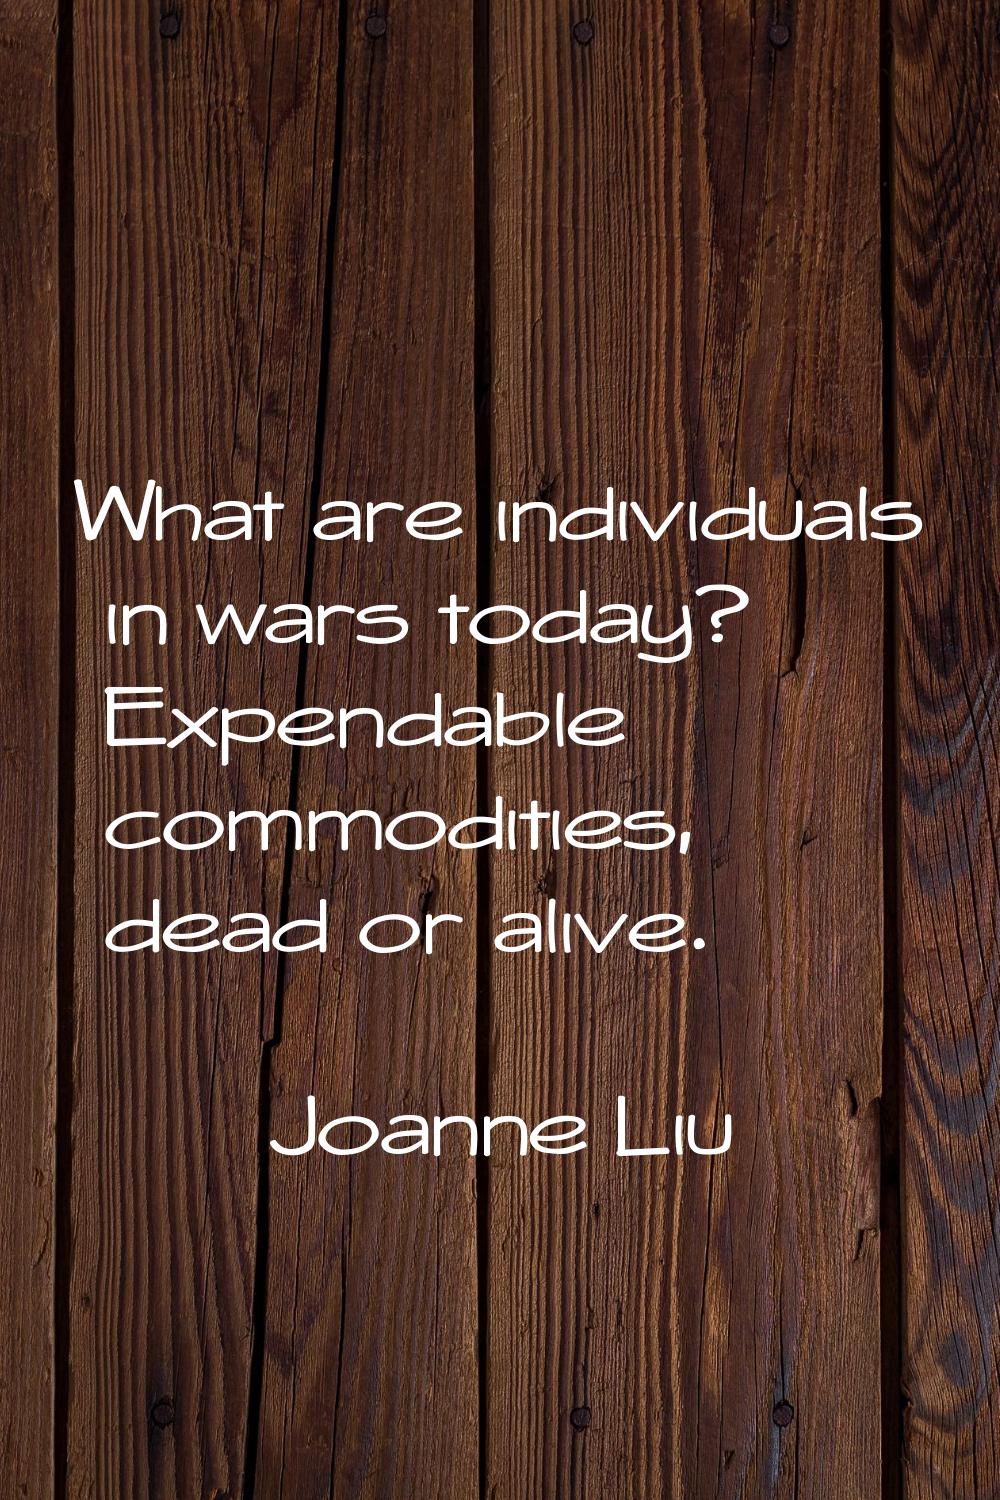 What are individuals in wars today? Expendable commodities, dead or alive.